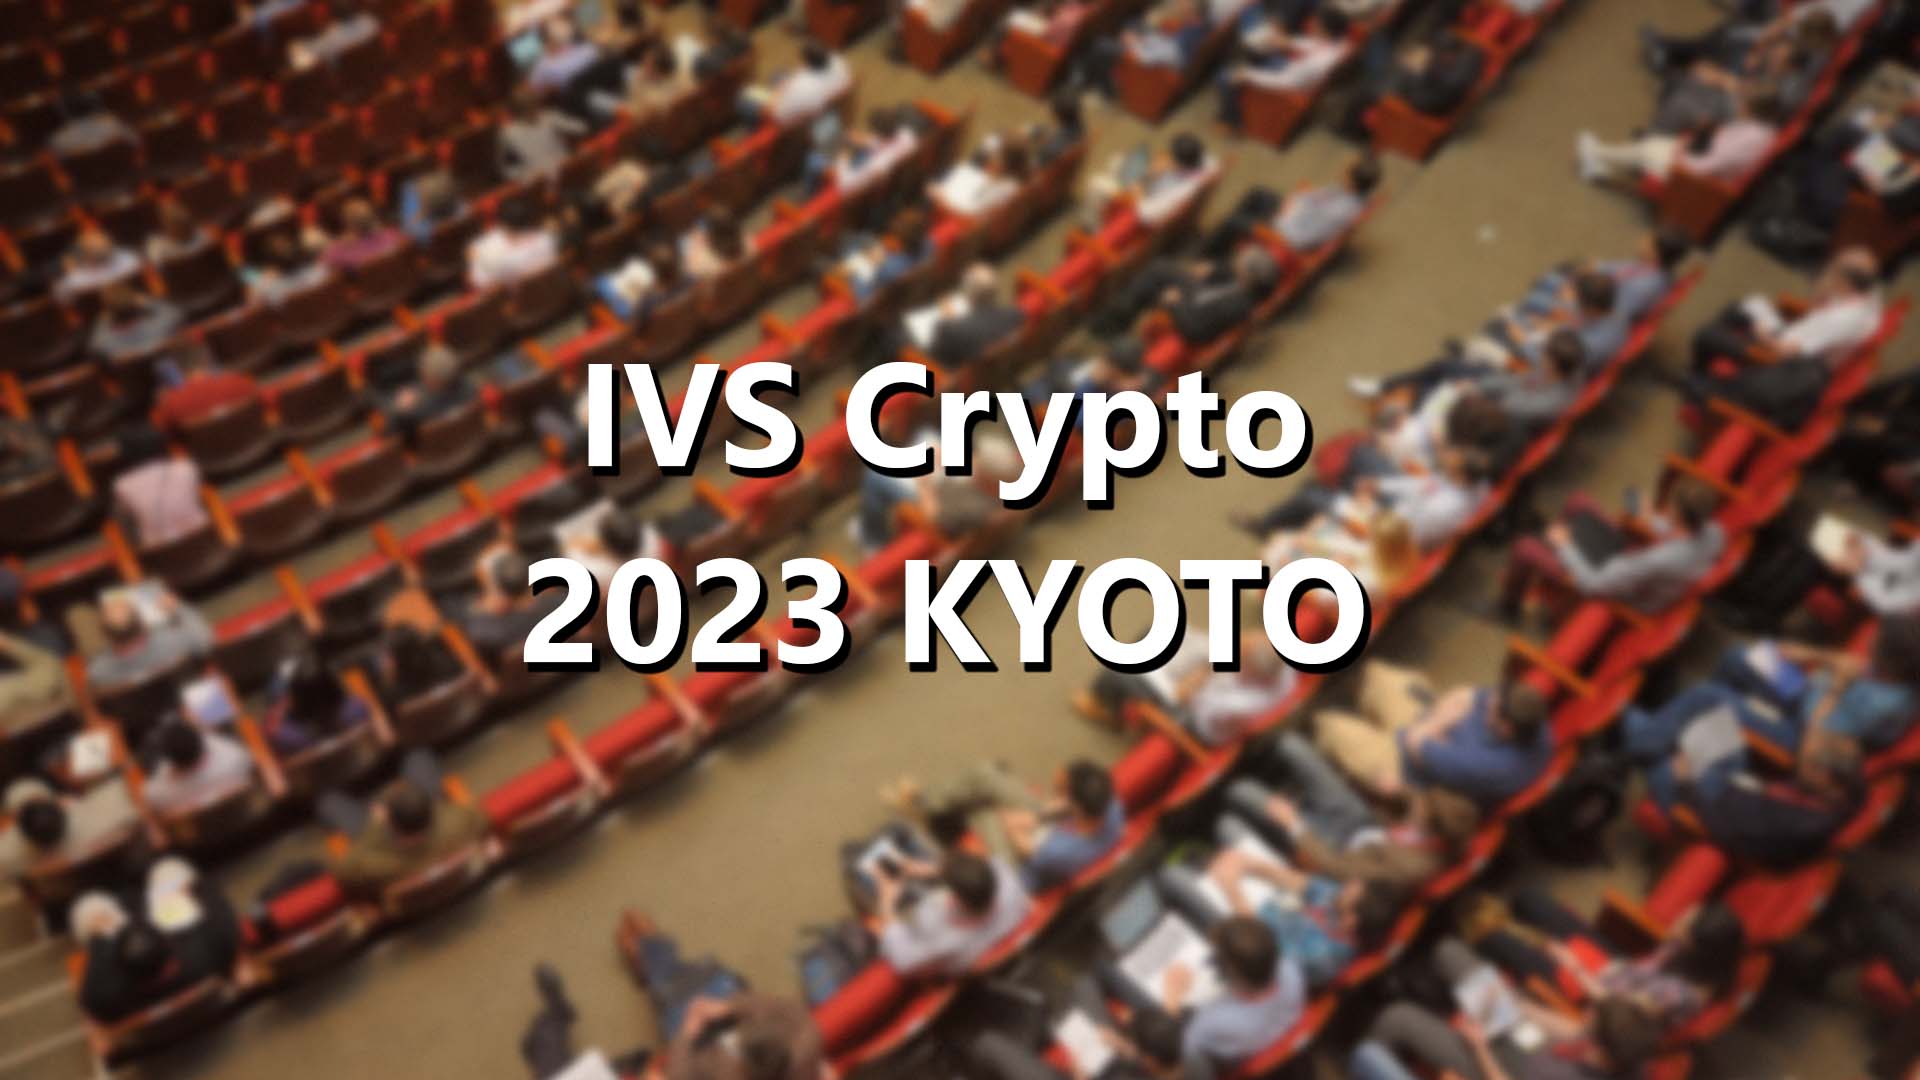 The Biggest Crypto Conference in Japan, IVS Crypto 2023 KYOTO